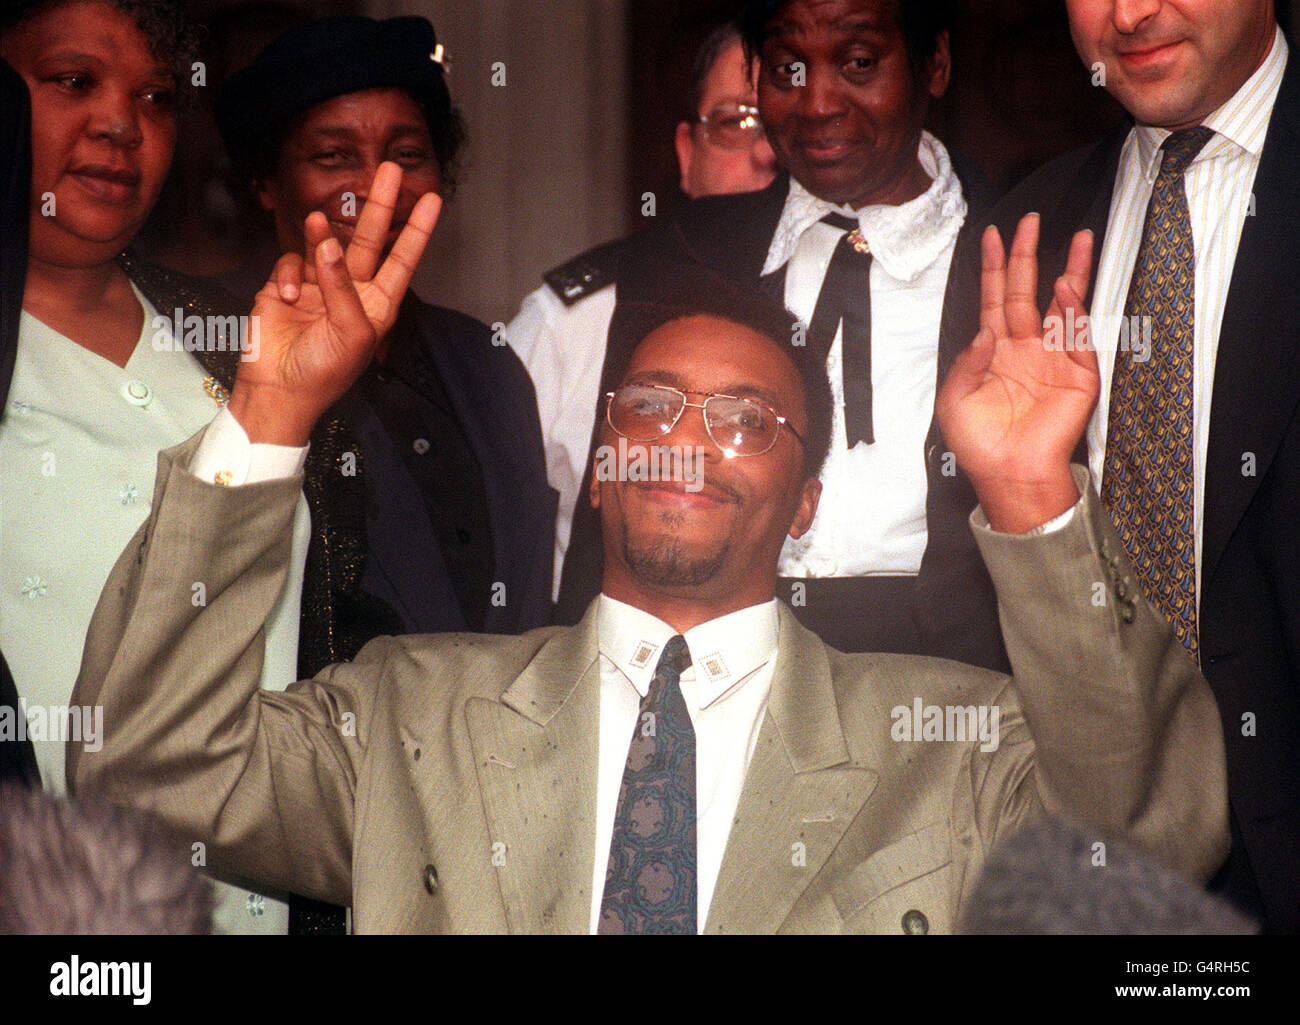 Former boxer Michael Watson celebrates outside the High Court in London after successfully winning the first round of his High Court compensation battle against the British Boxing Board of Control. * Watson suffered brain damage during his super middle-weight bout against Chris Eubank at White Hart Lane, north London, in September 1991 and is suing for damages over the events at the end of a boxing match. Stock Photo